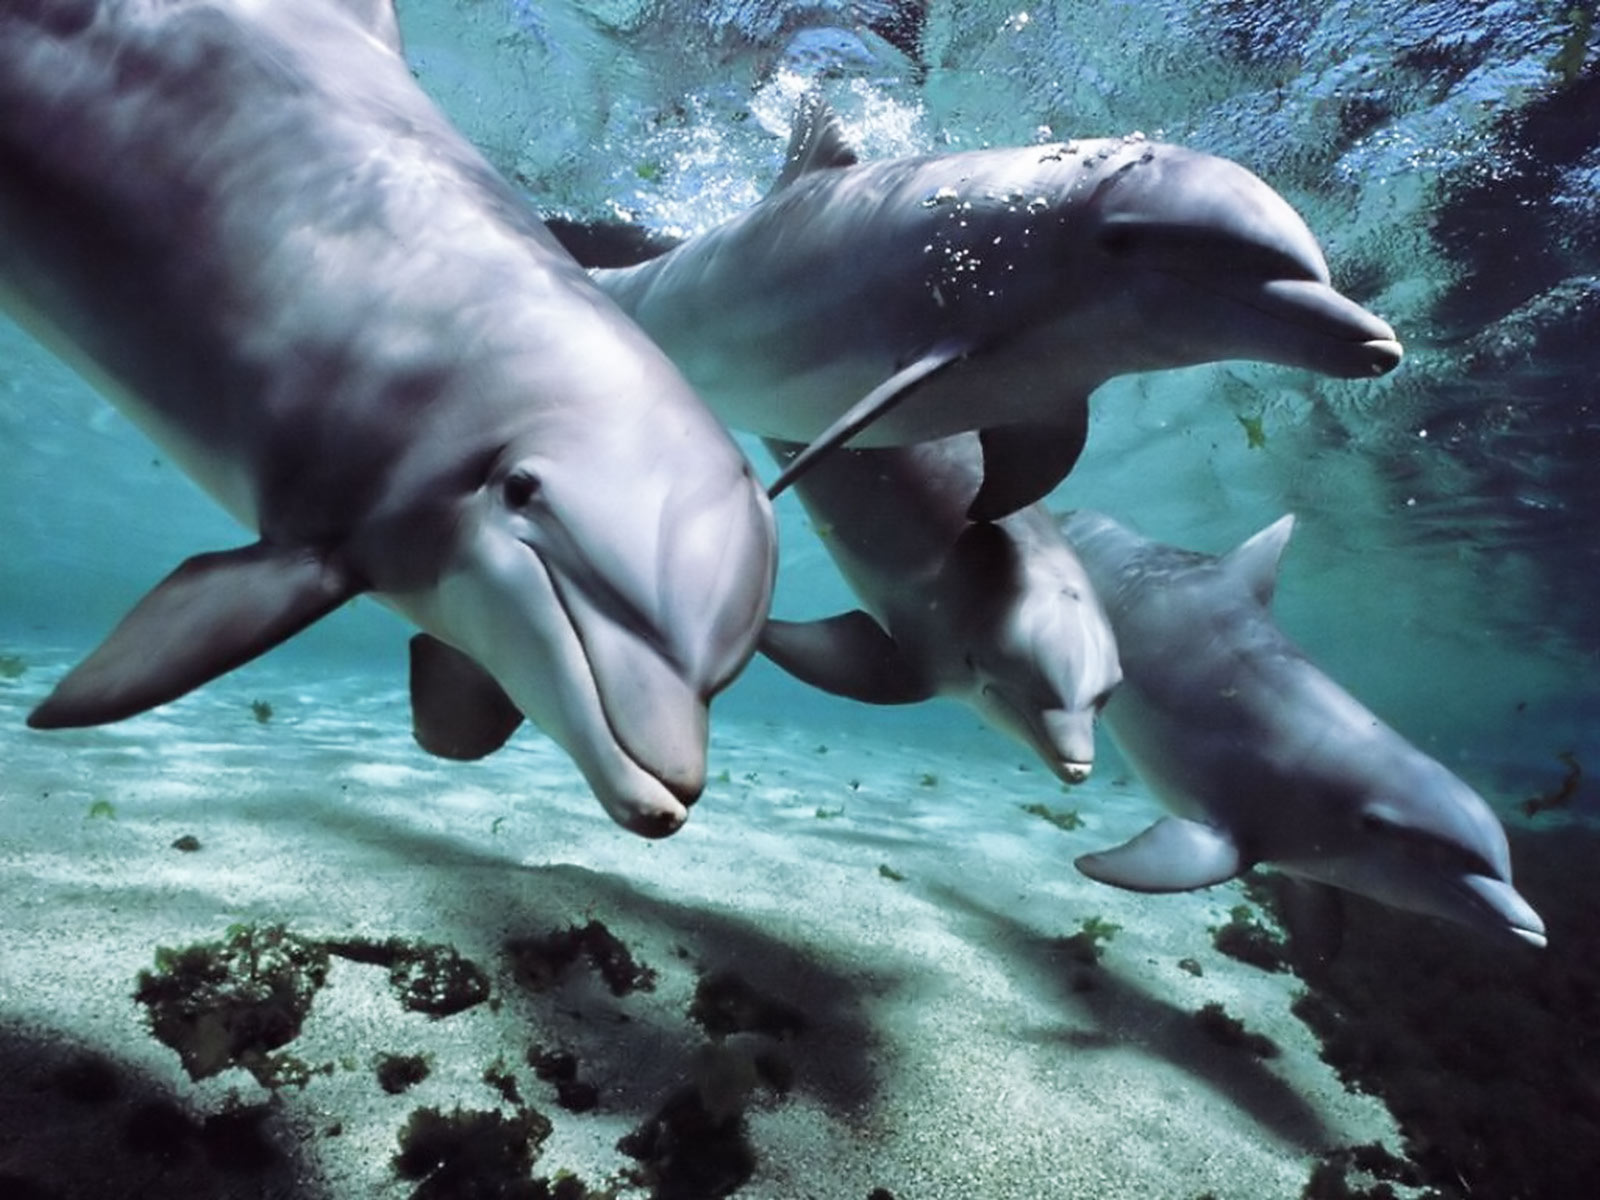 Further Proof That Dolphins Have Human-Like Intelligence and Their Own 'Language'